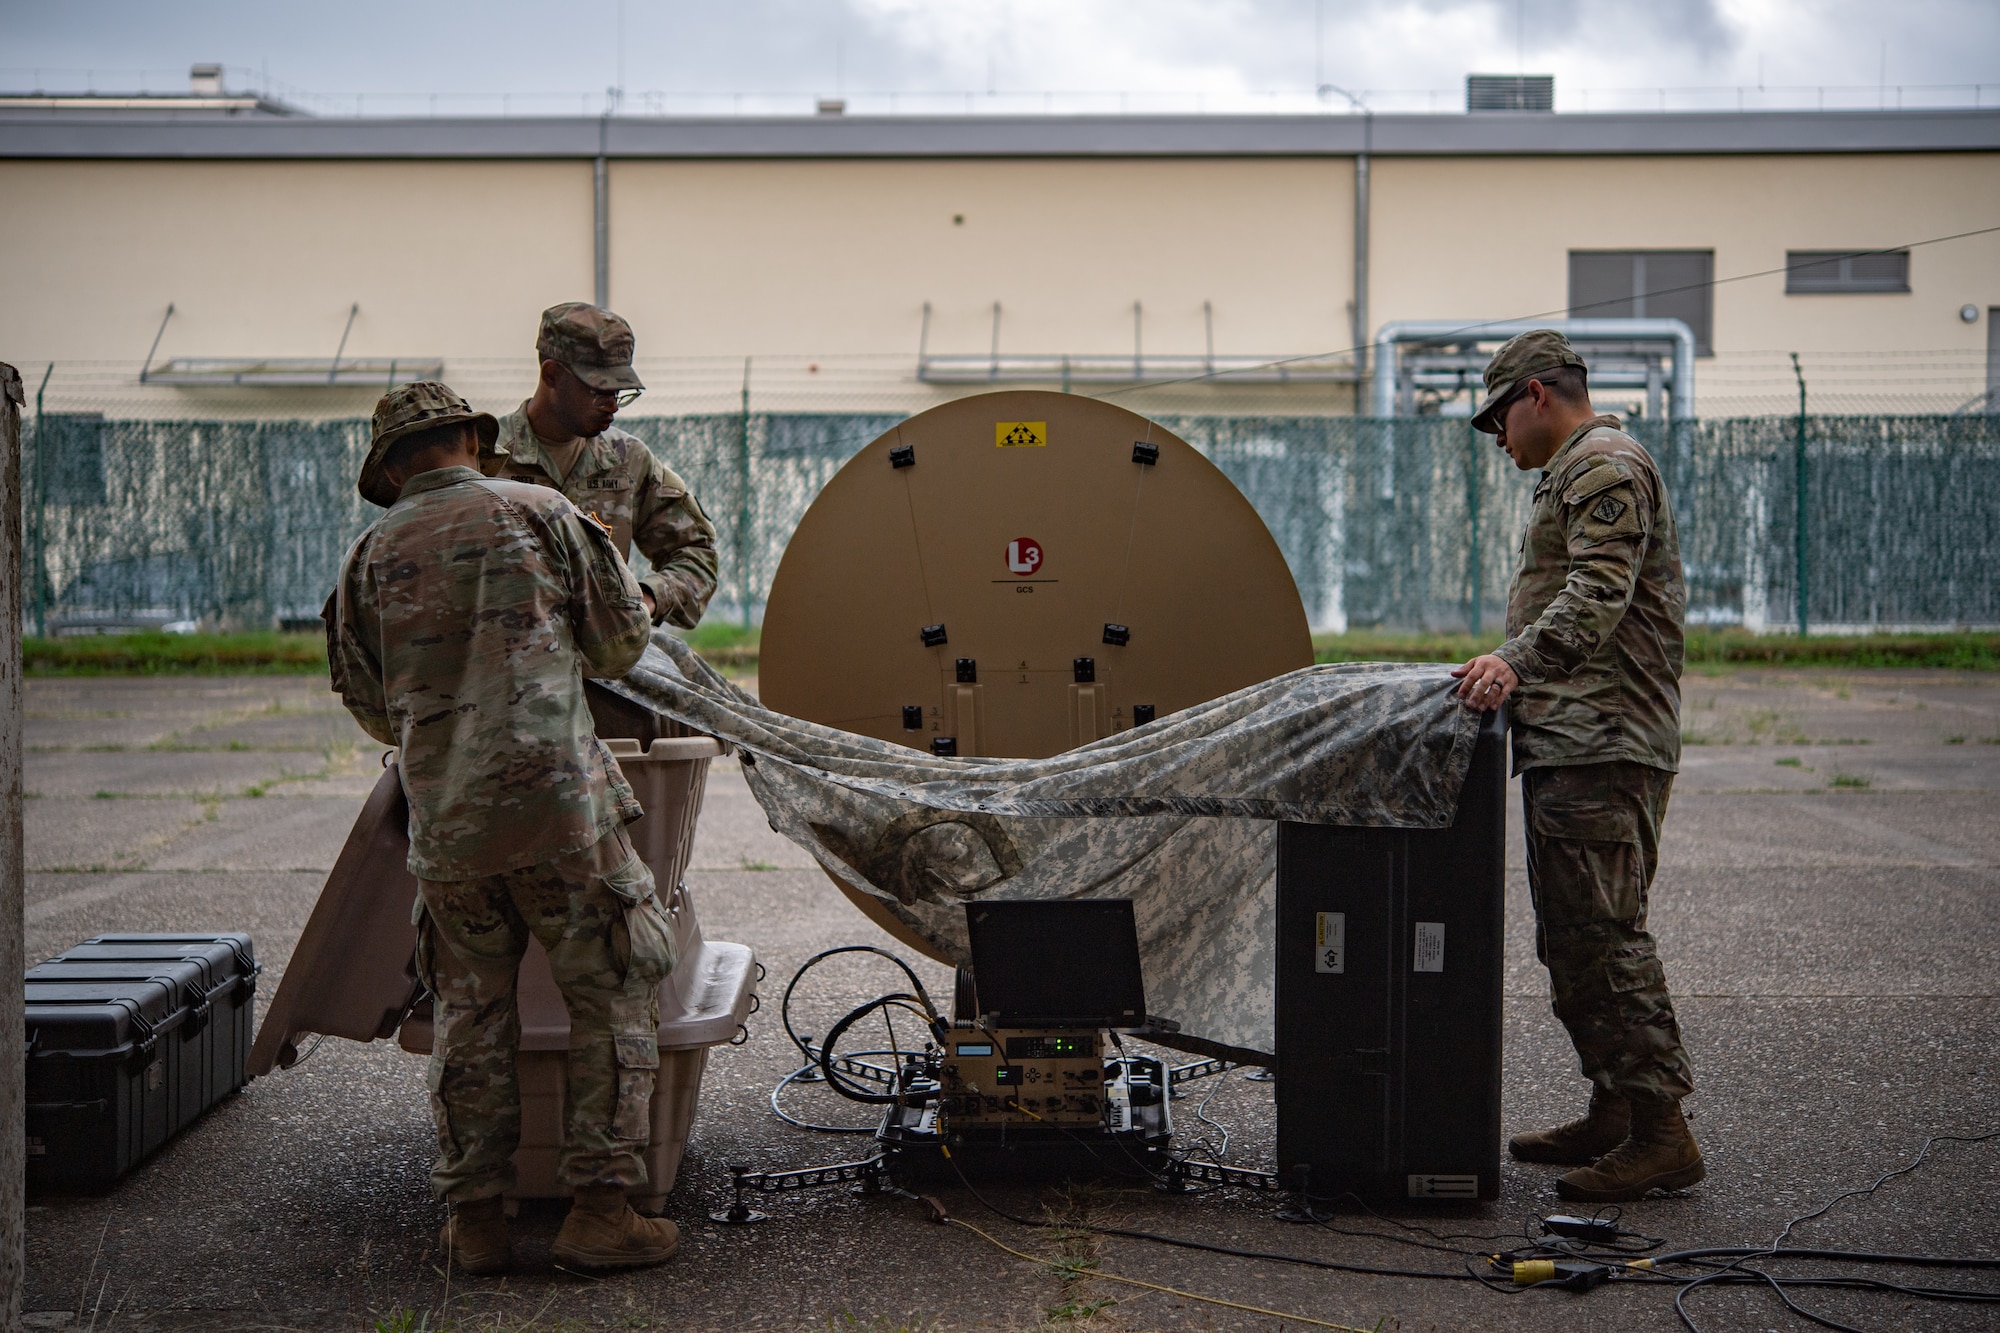 U.S. Army soldiers assigned to the 44th expeditionary signal battalion, create a shelter from the rain